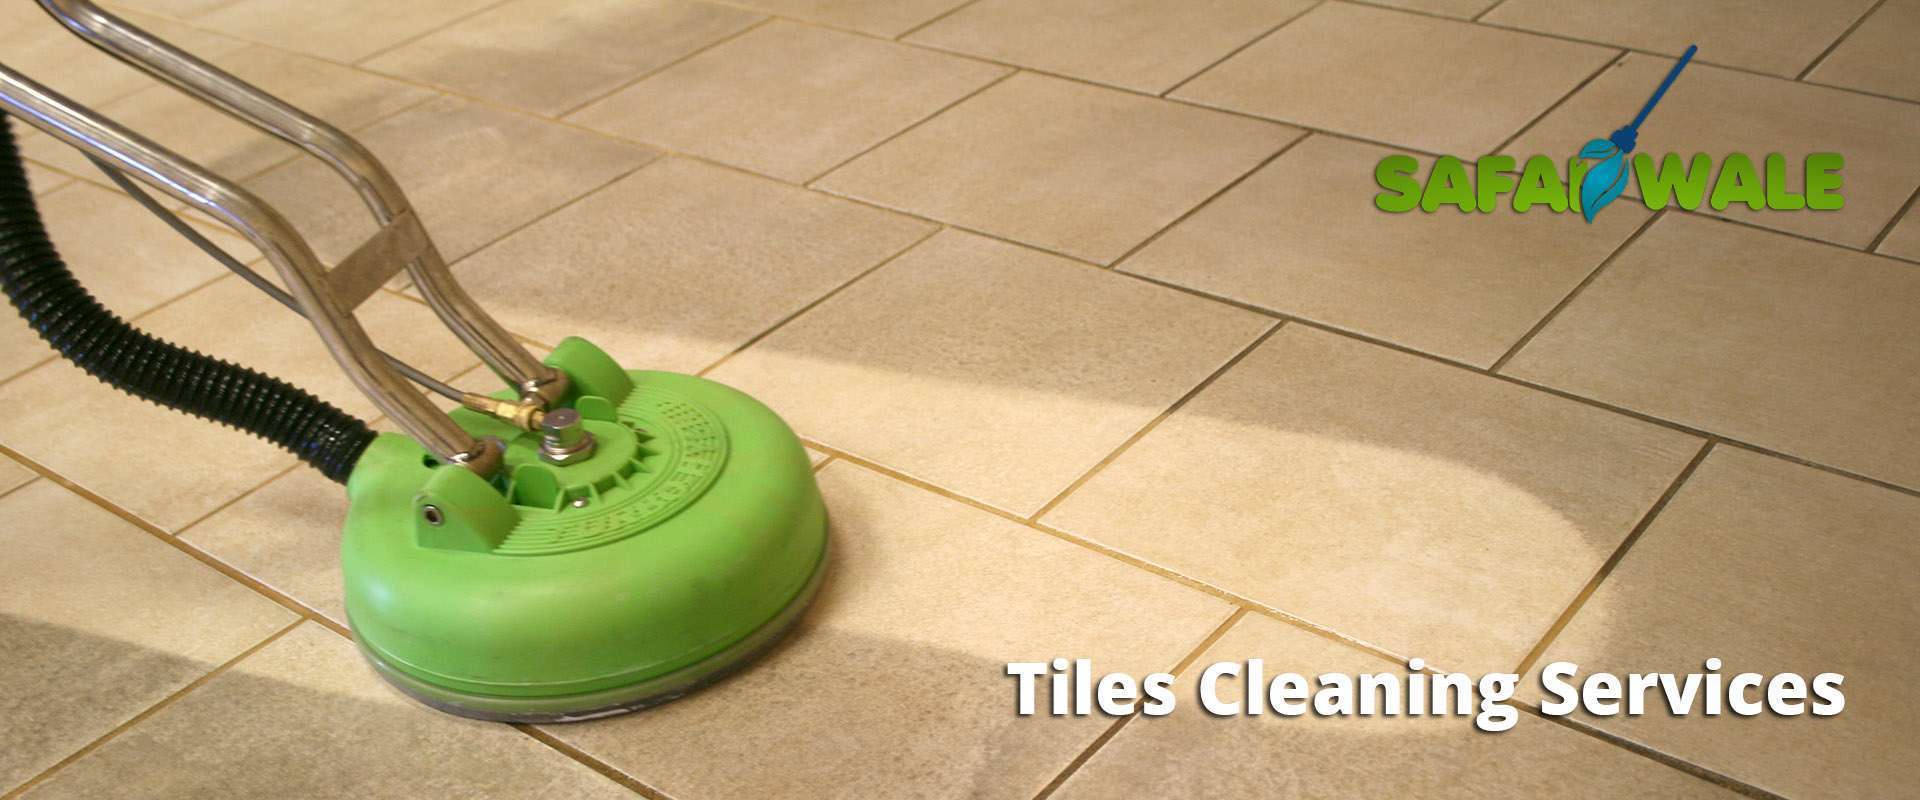 Tiles Cleaning Services In Kaushambi